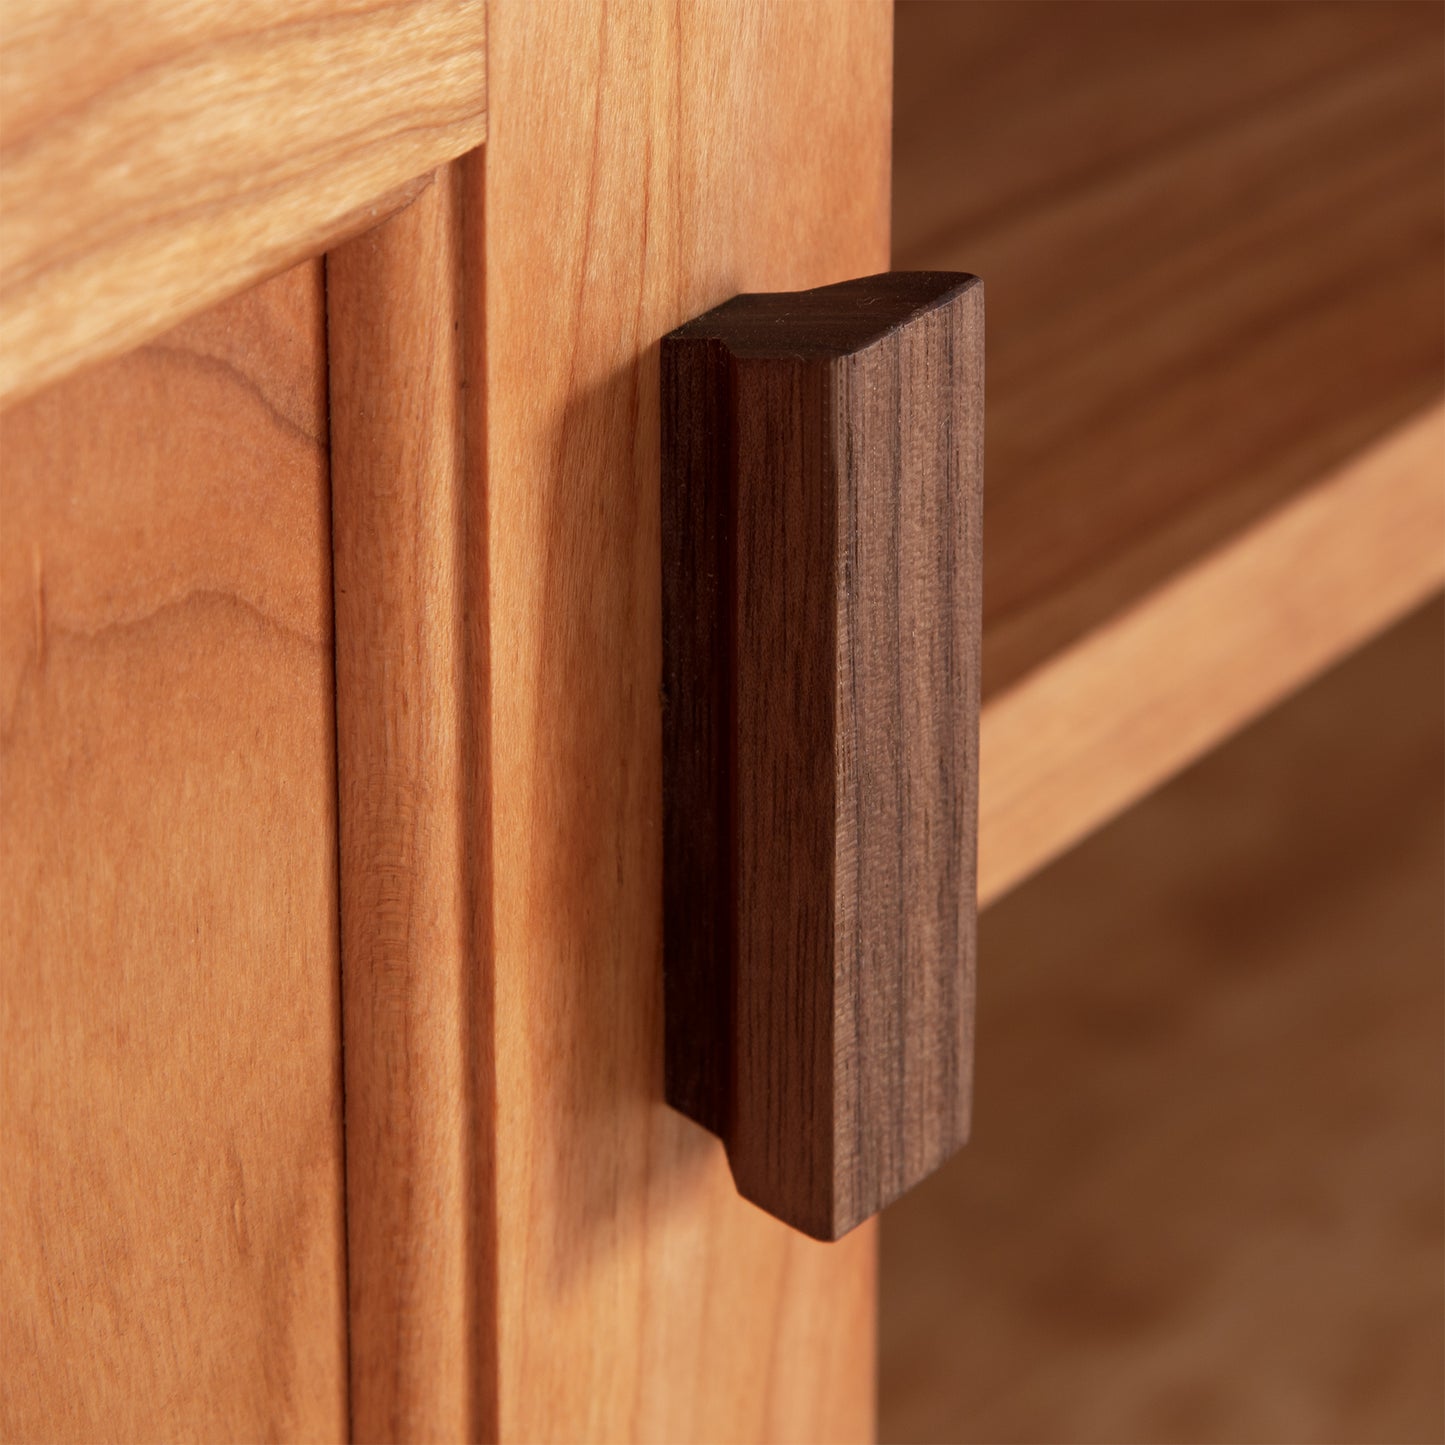 A close up of a Maple Corner Woodworks Andover Modern 64" TV Stand cabinet door handle.